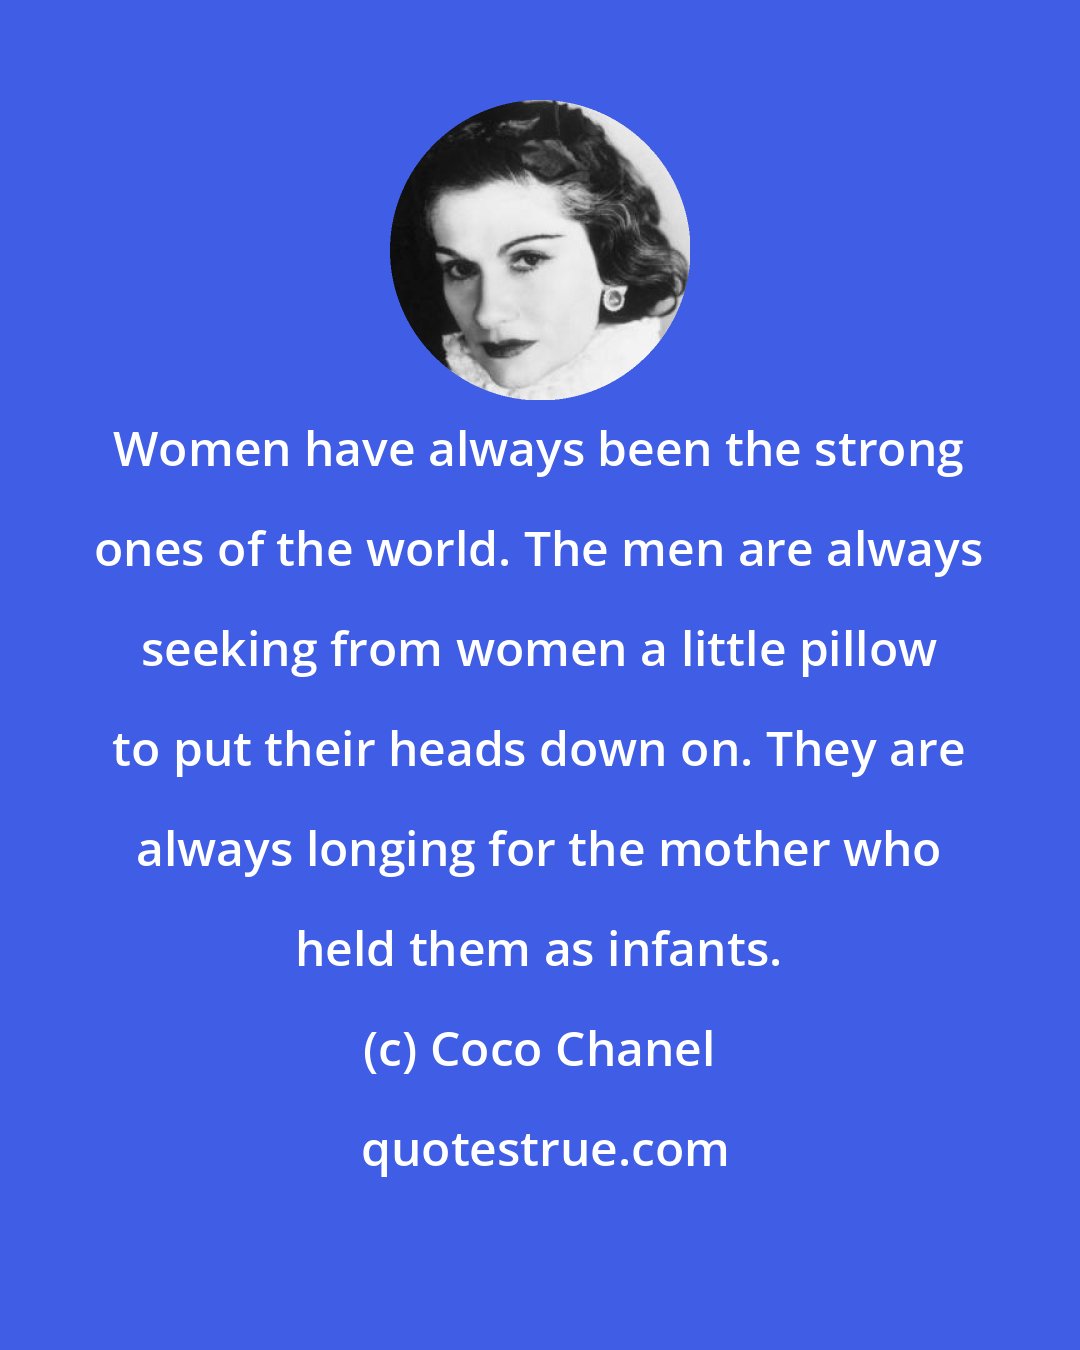 Coco Chanel: Women have always been the strong ones of the world. The men are always seeking from women a little pillow to put their heads down on. They are always longing for the mother who held them as infants.